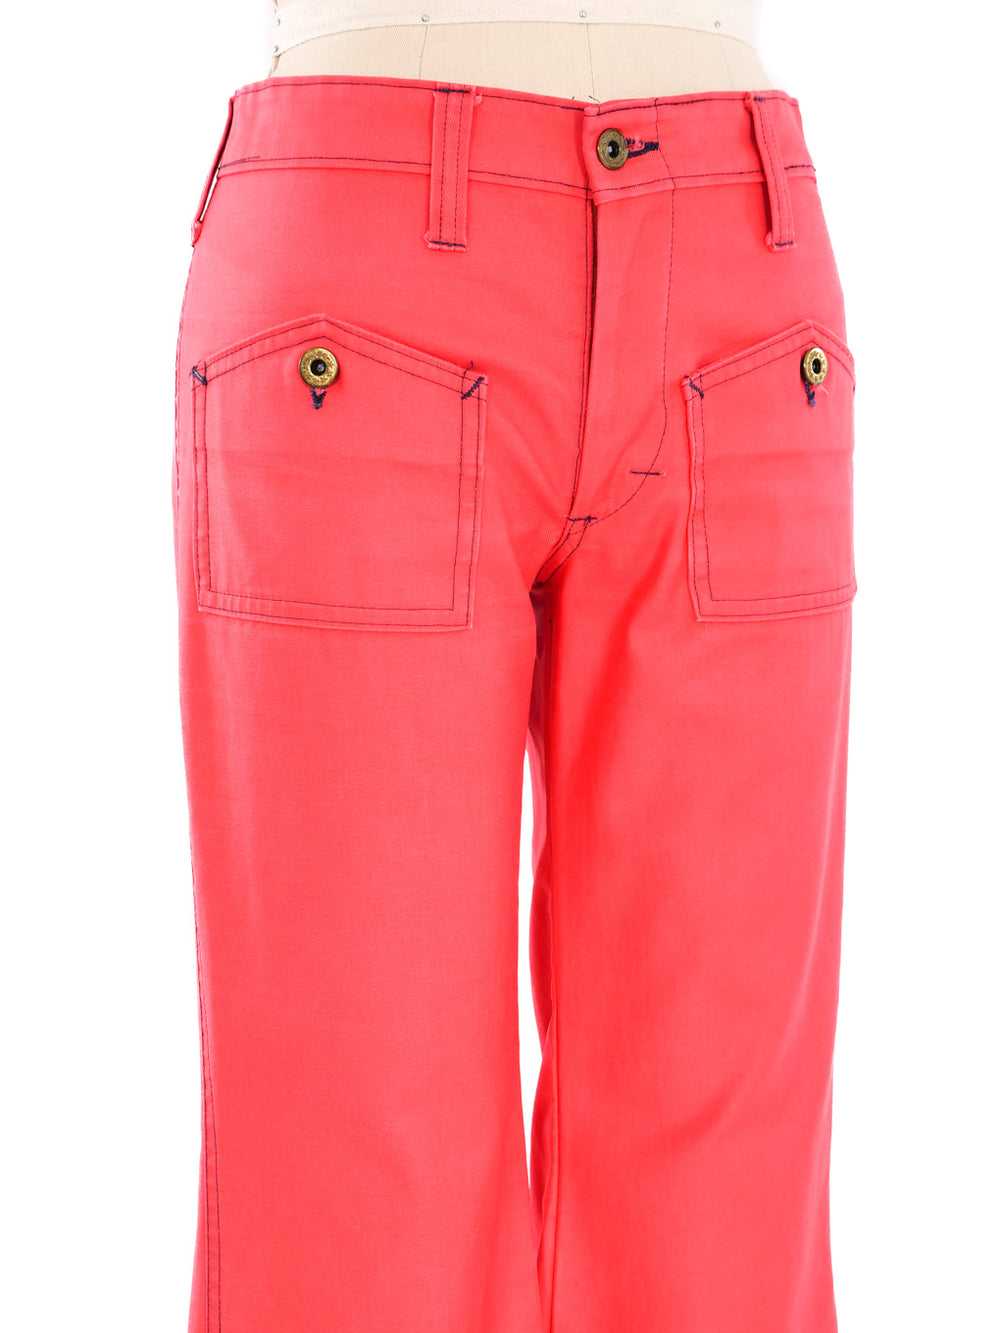 1970's Red Contrast Stitch Flares - image 2